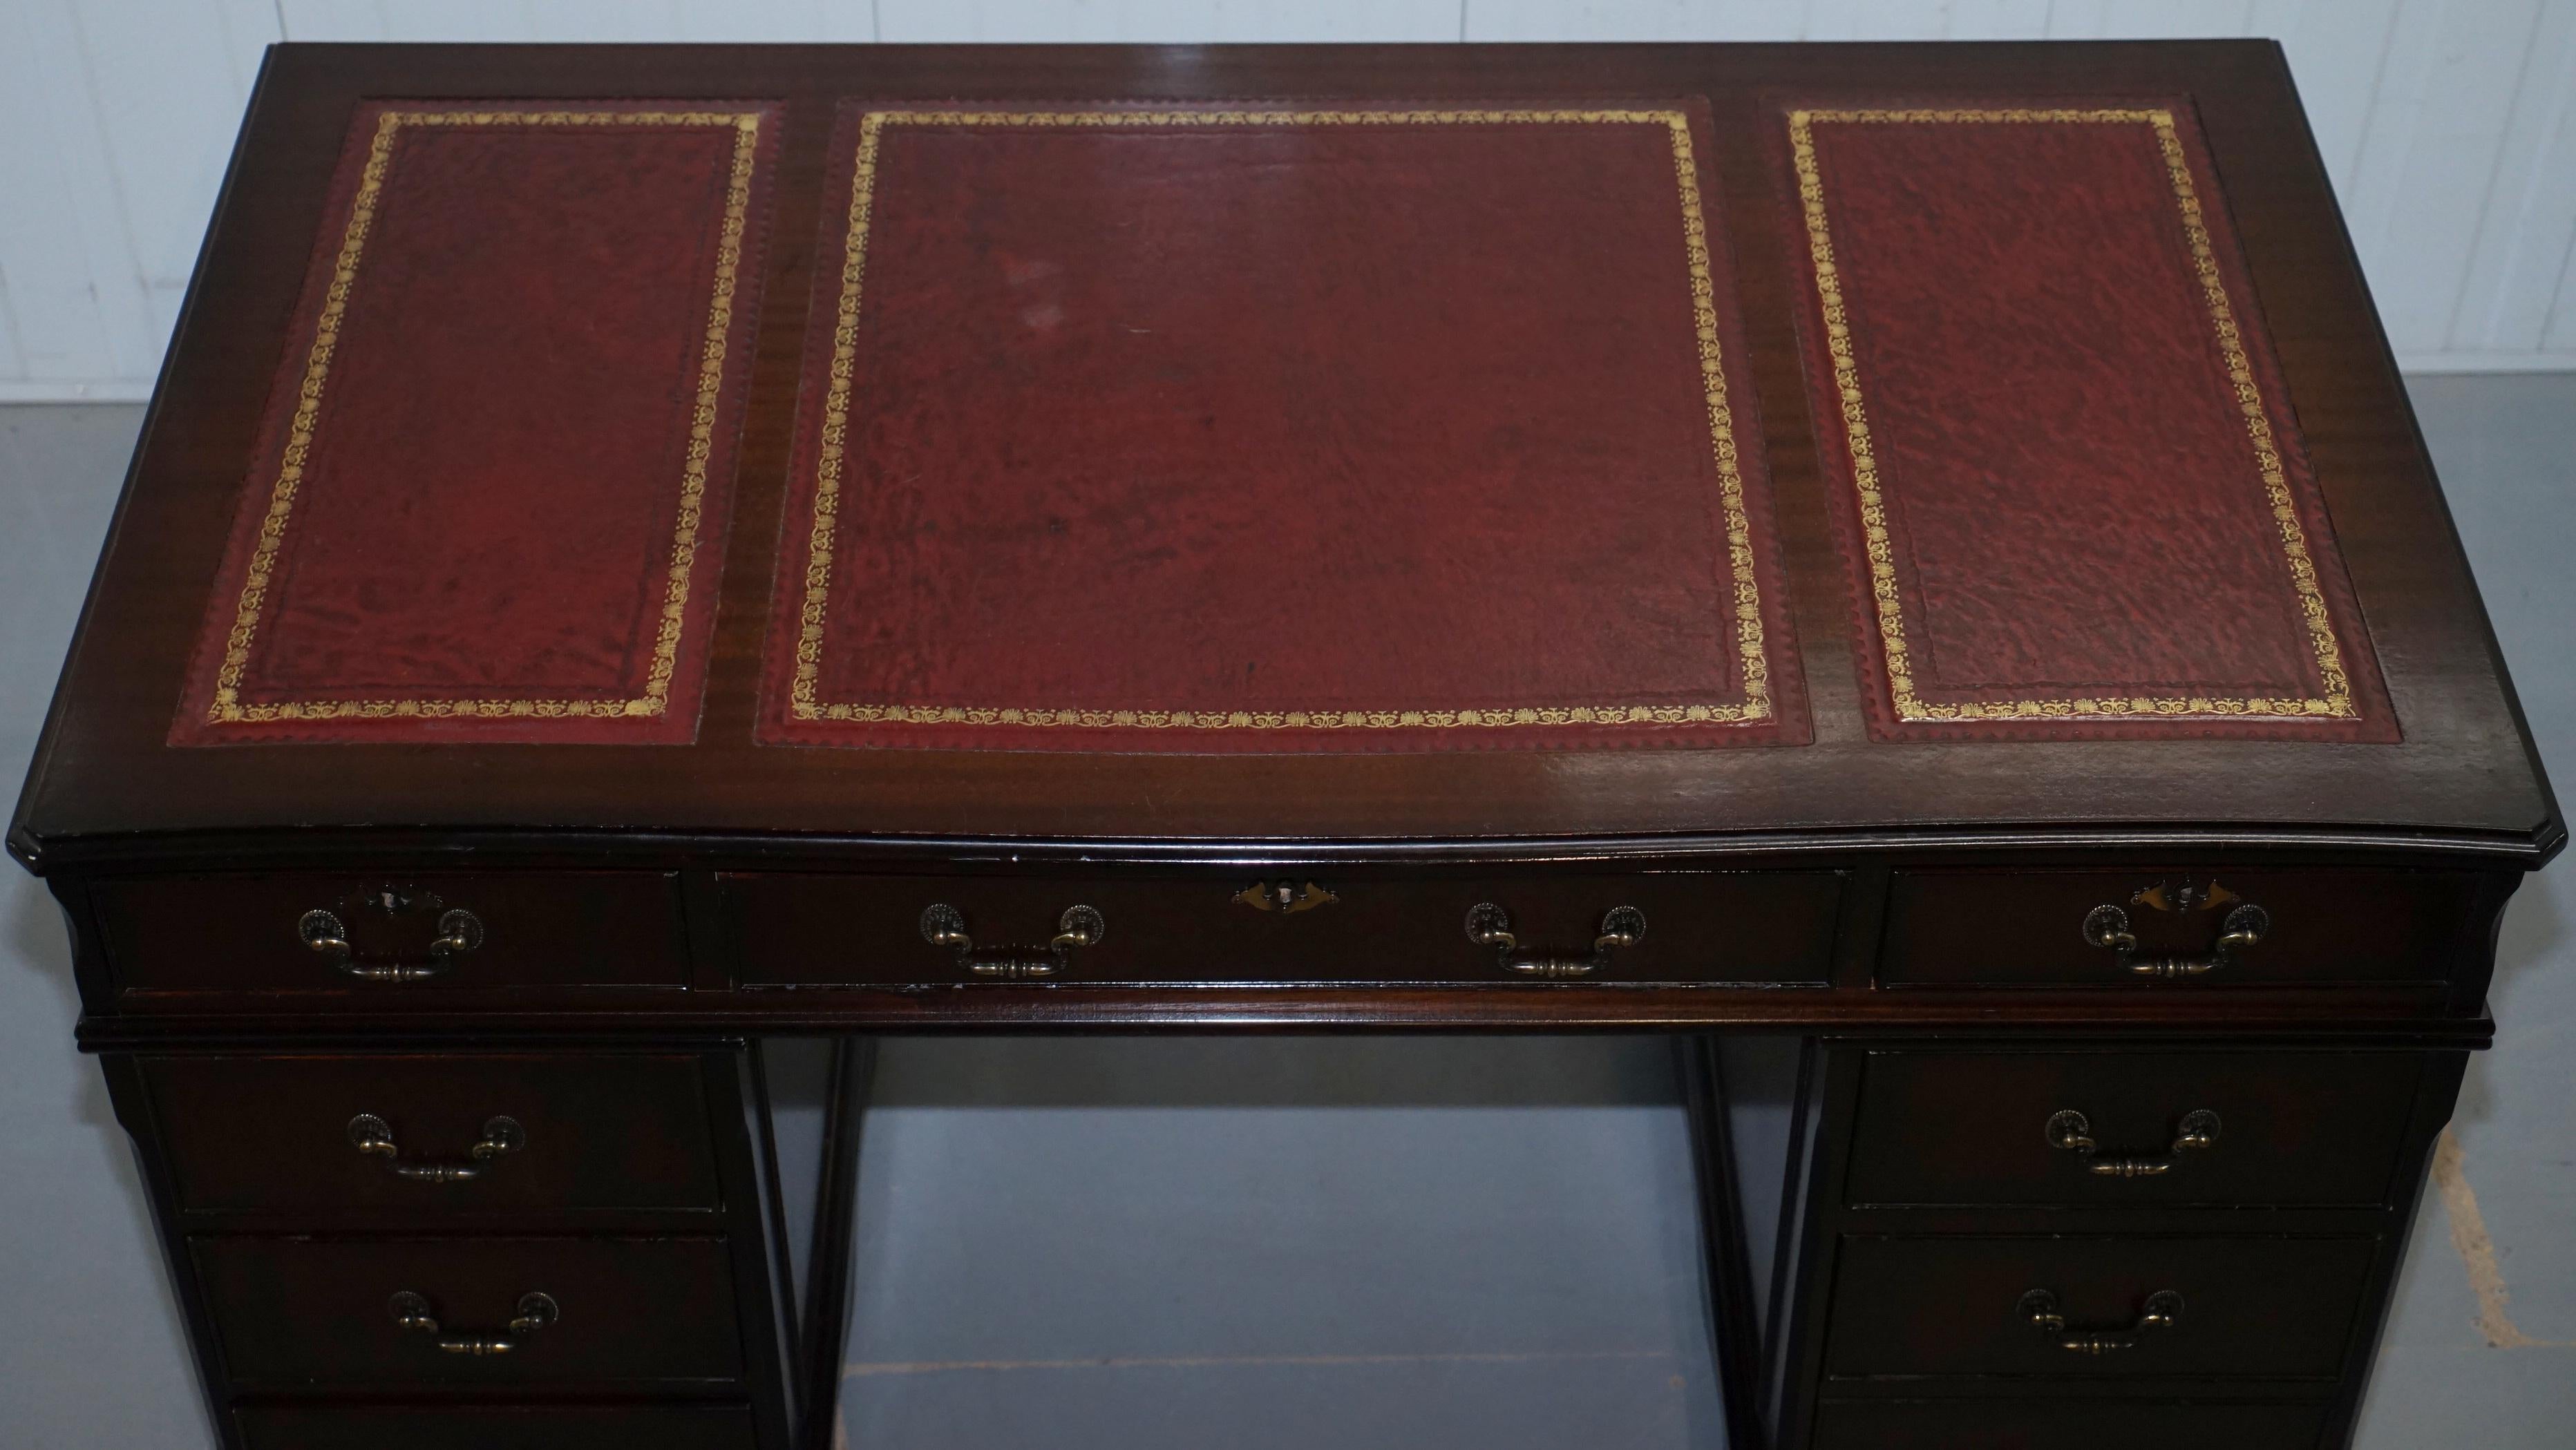 English Lovely Solid Mahogany Twin Pedestal Partner Desk Oxblood Leather Writing Surface